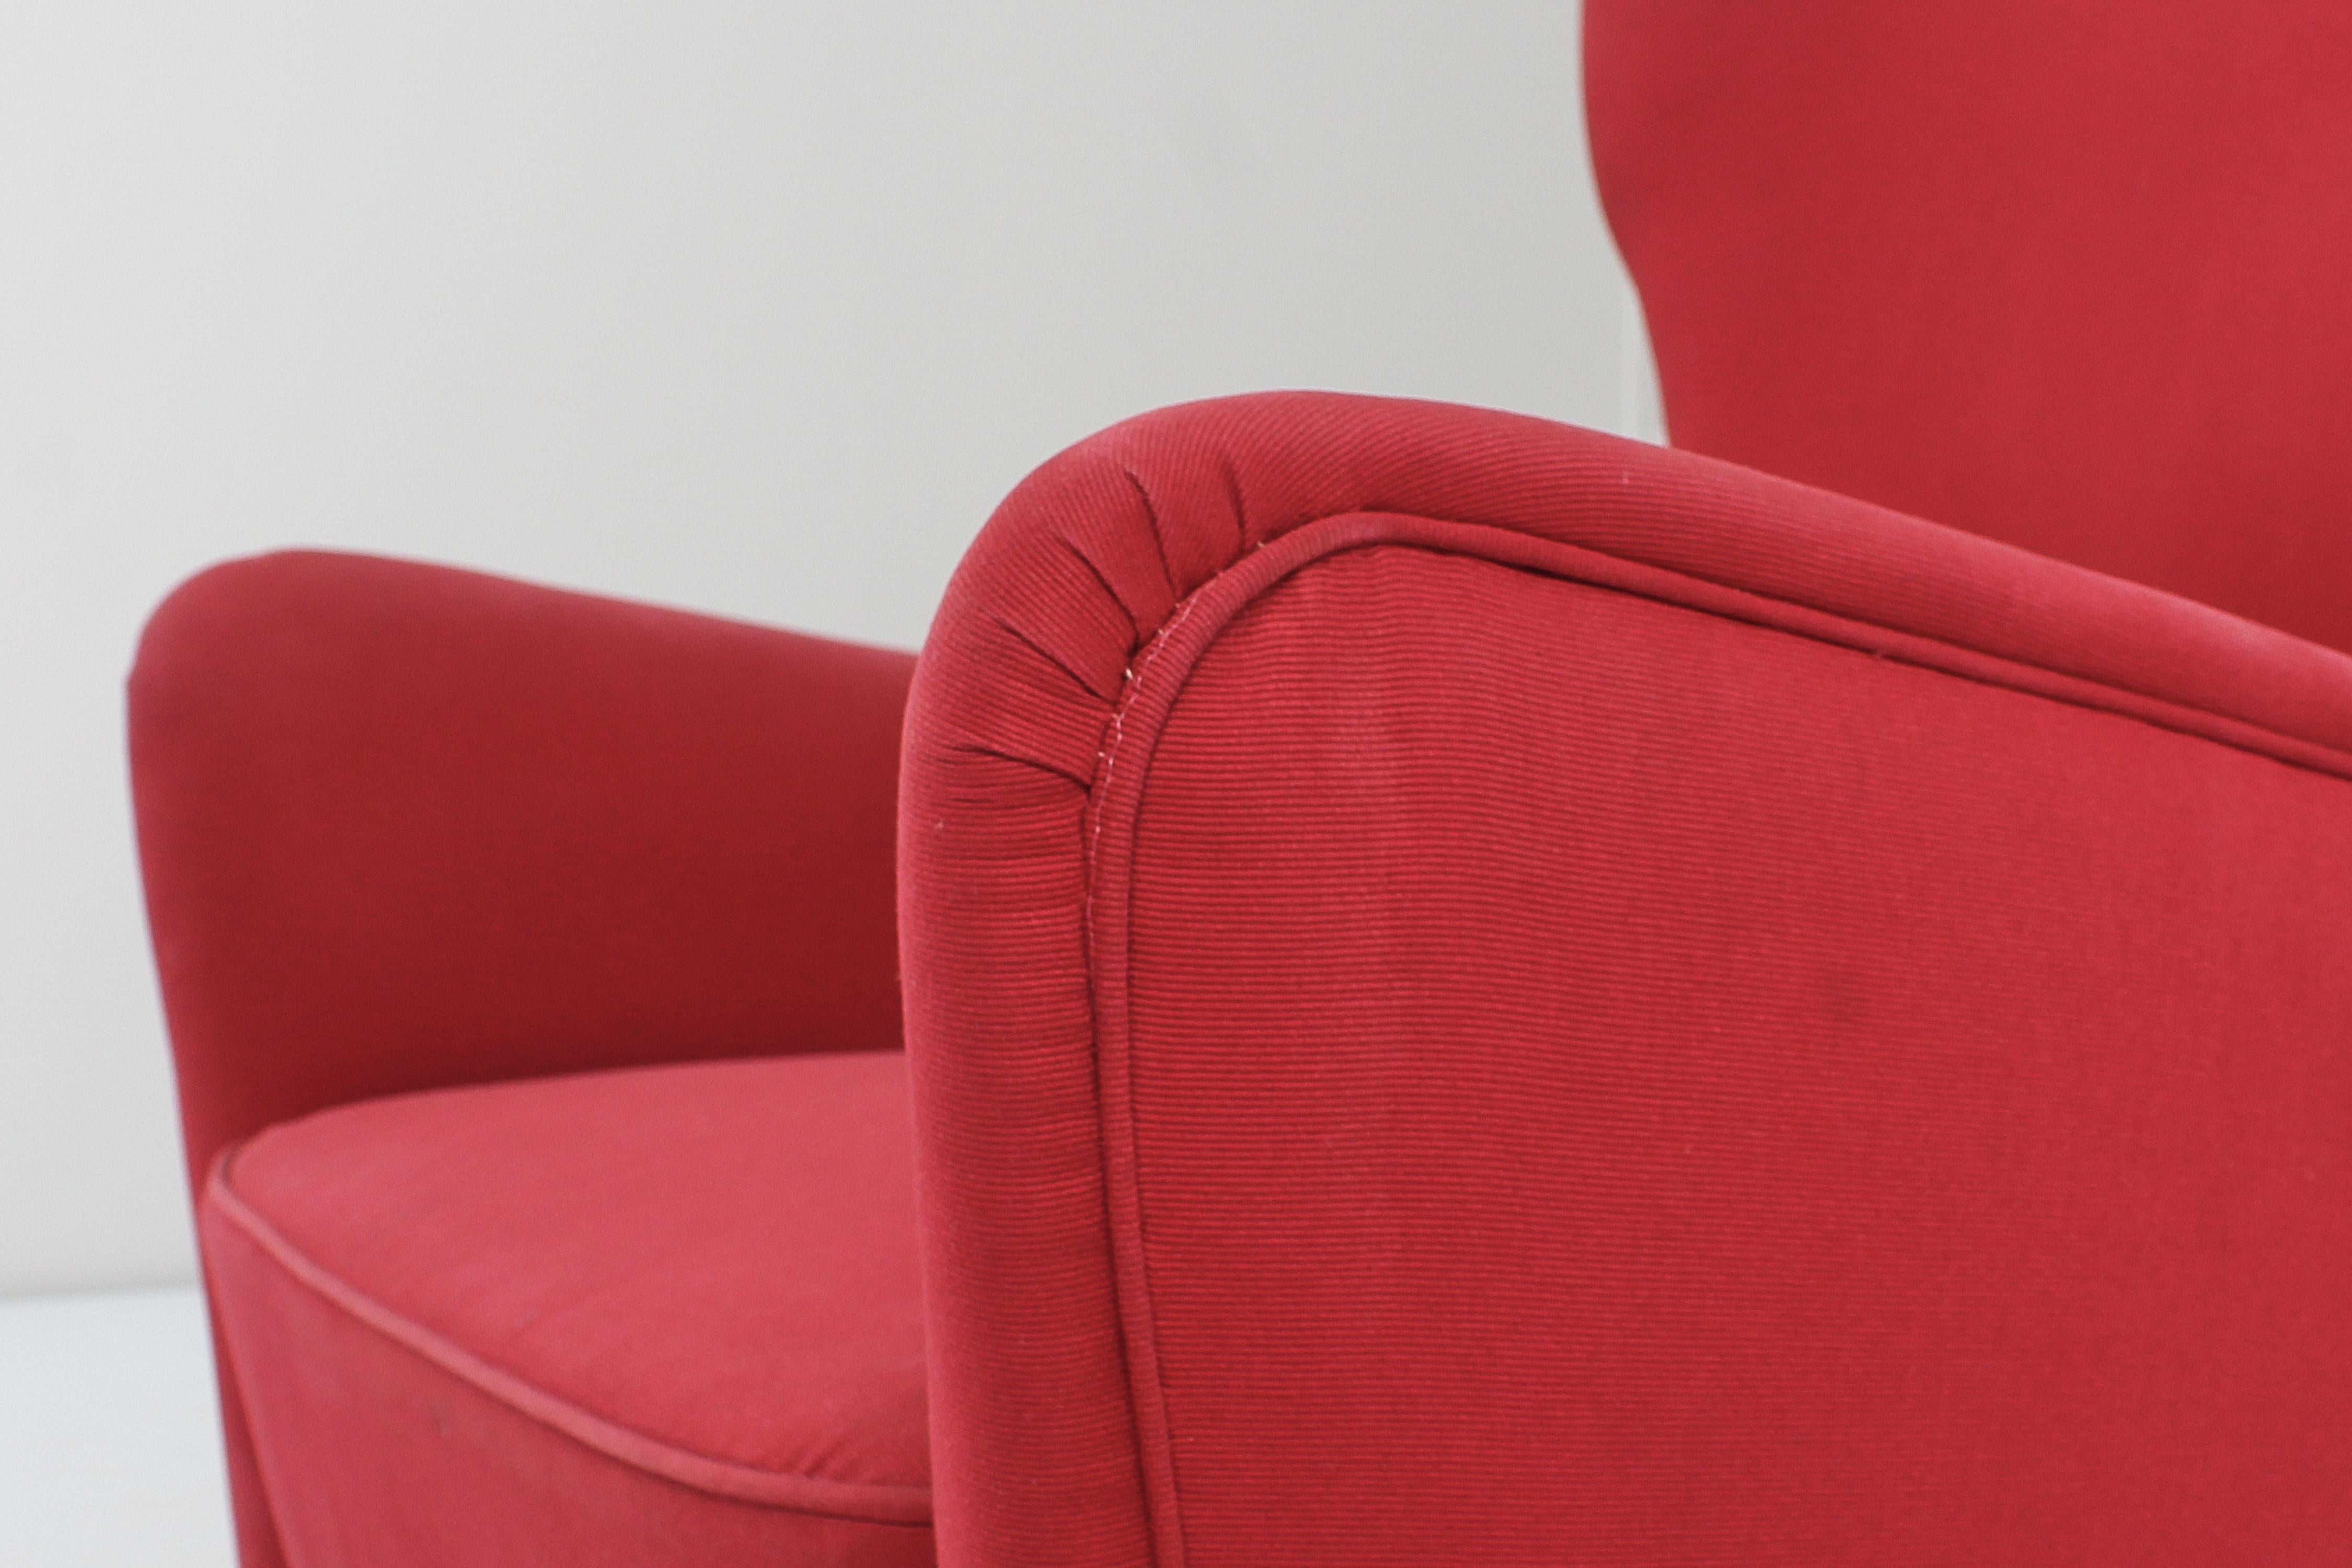 Midcentury Giò Ponti Style Wood and Red Fabric Armchair, circa 1950s Italy  For Sale 8